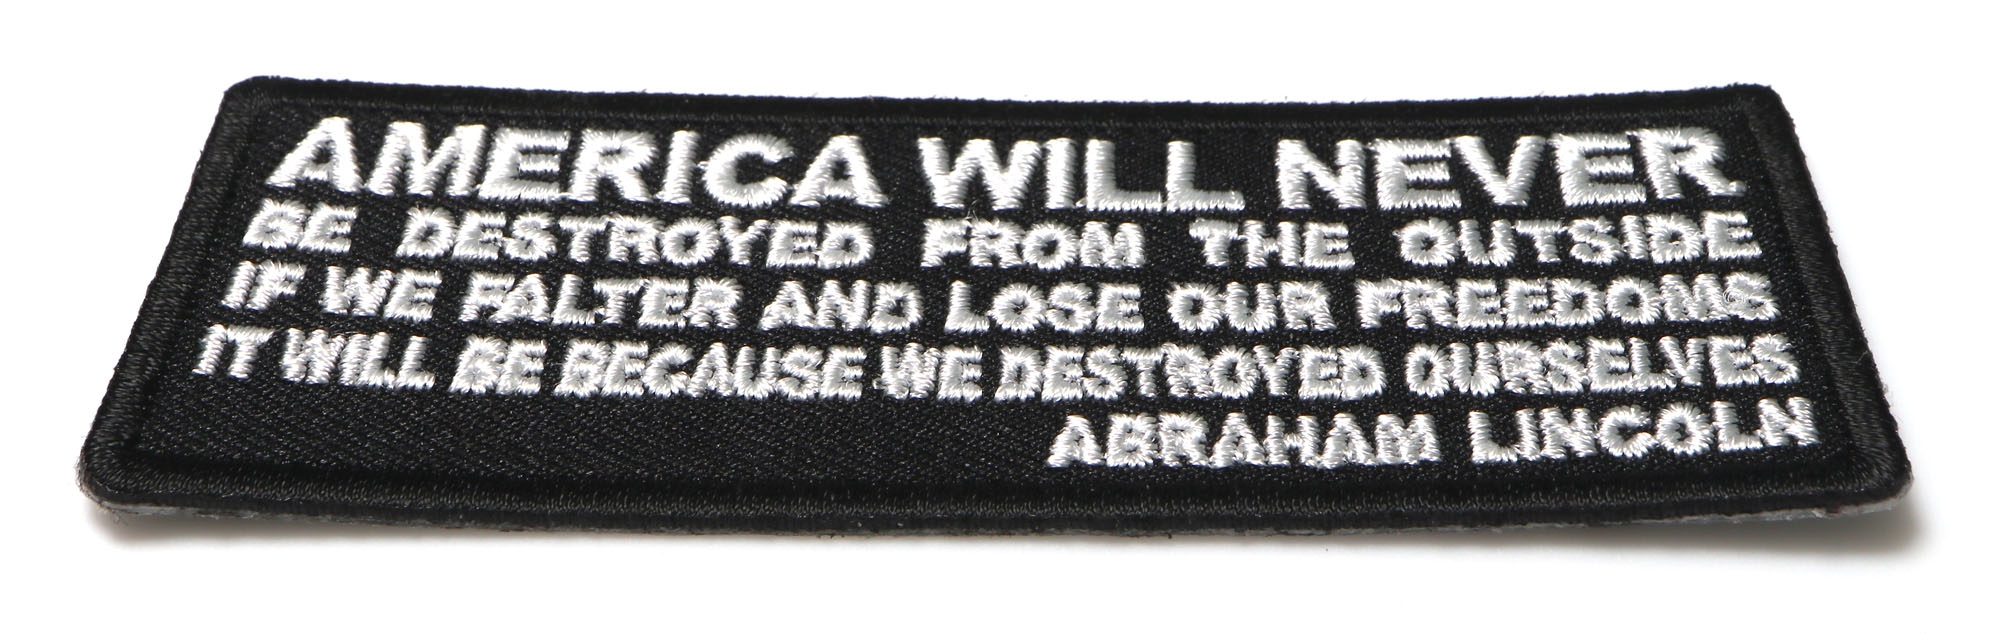 New Military Patches have Arrived